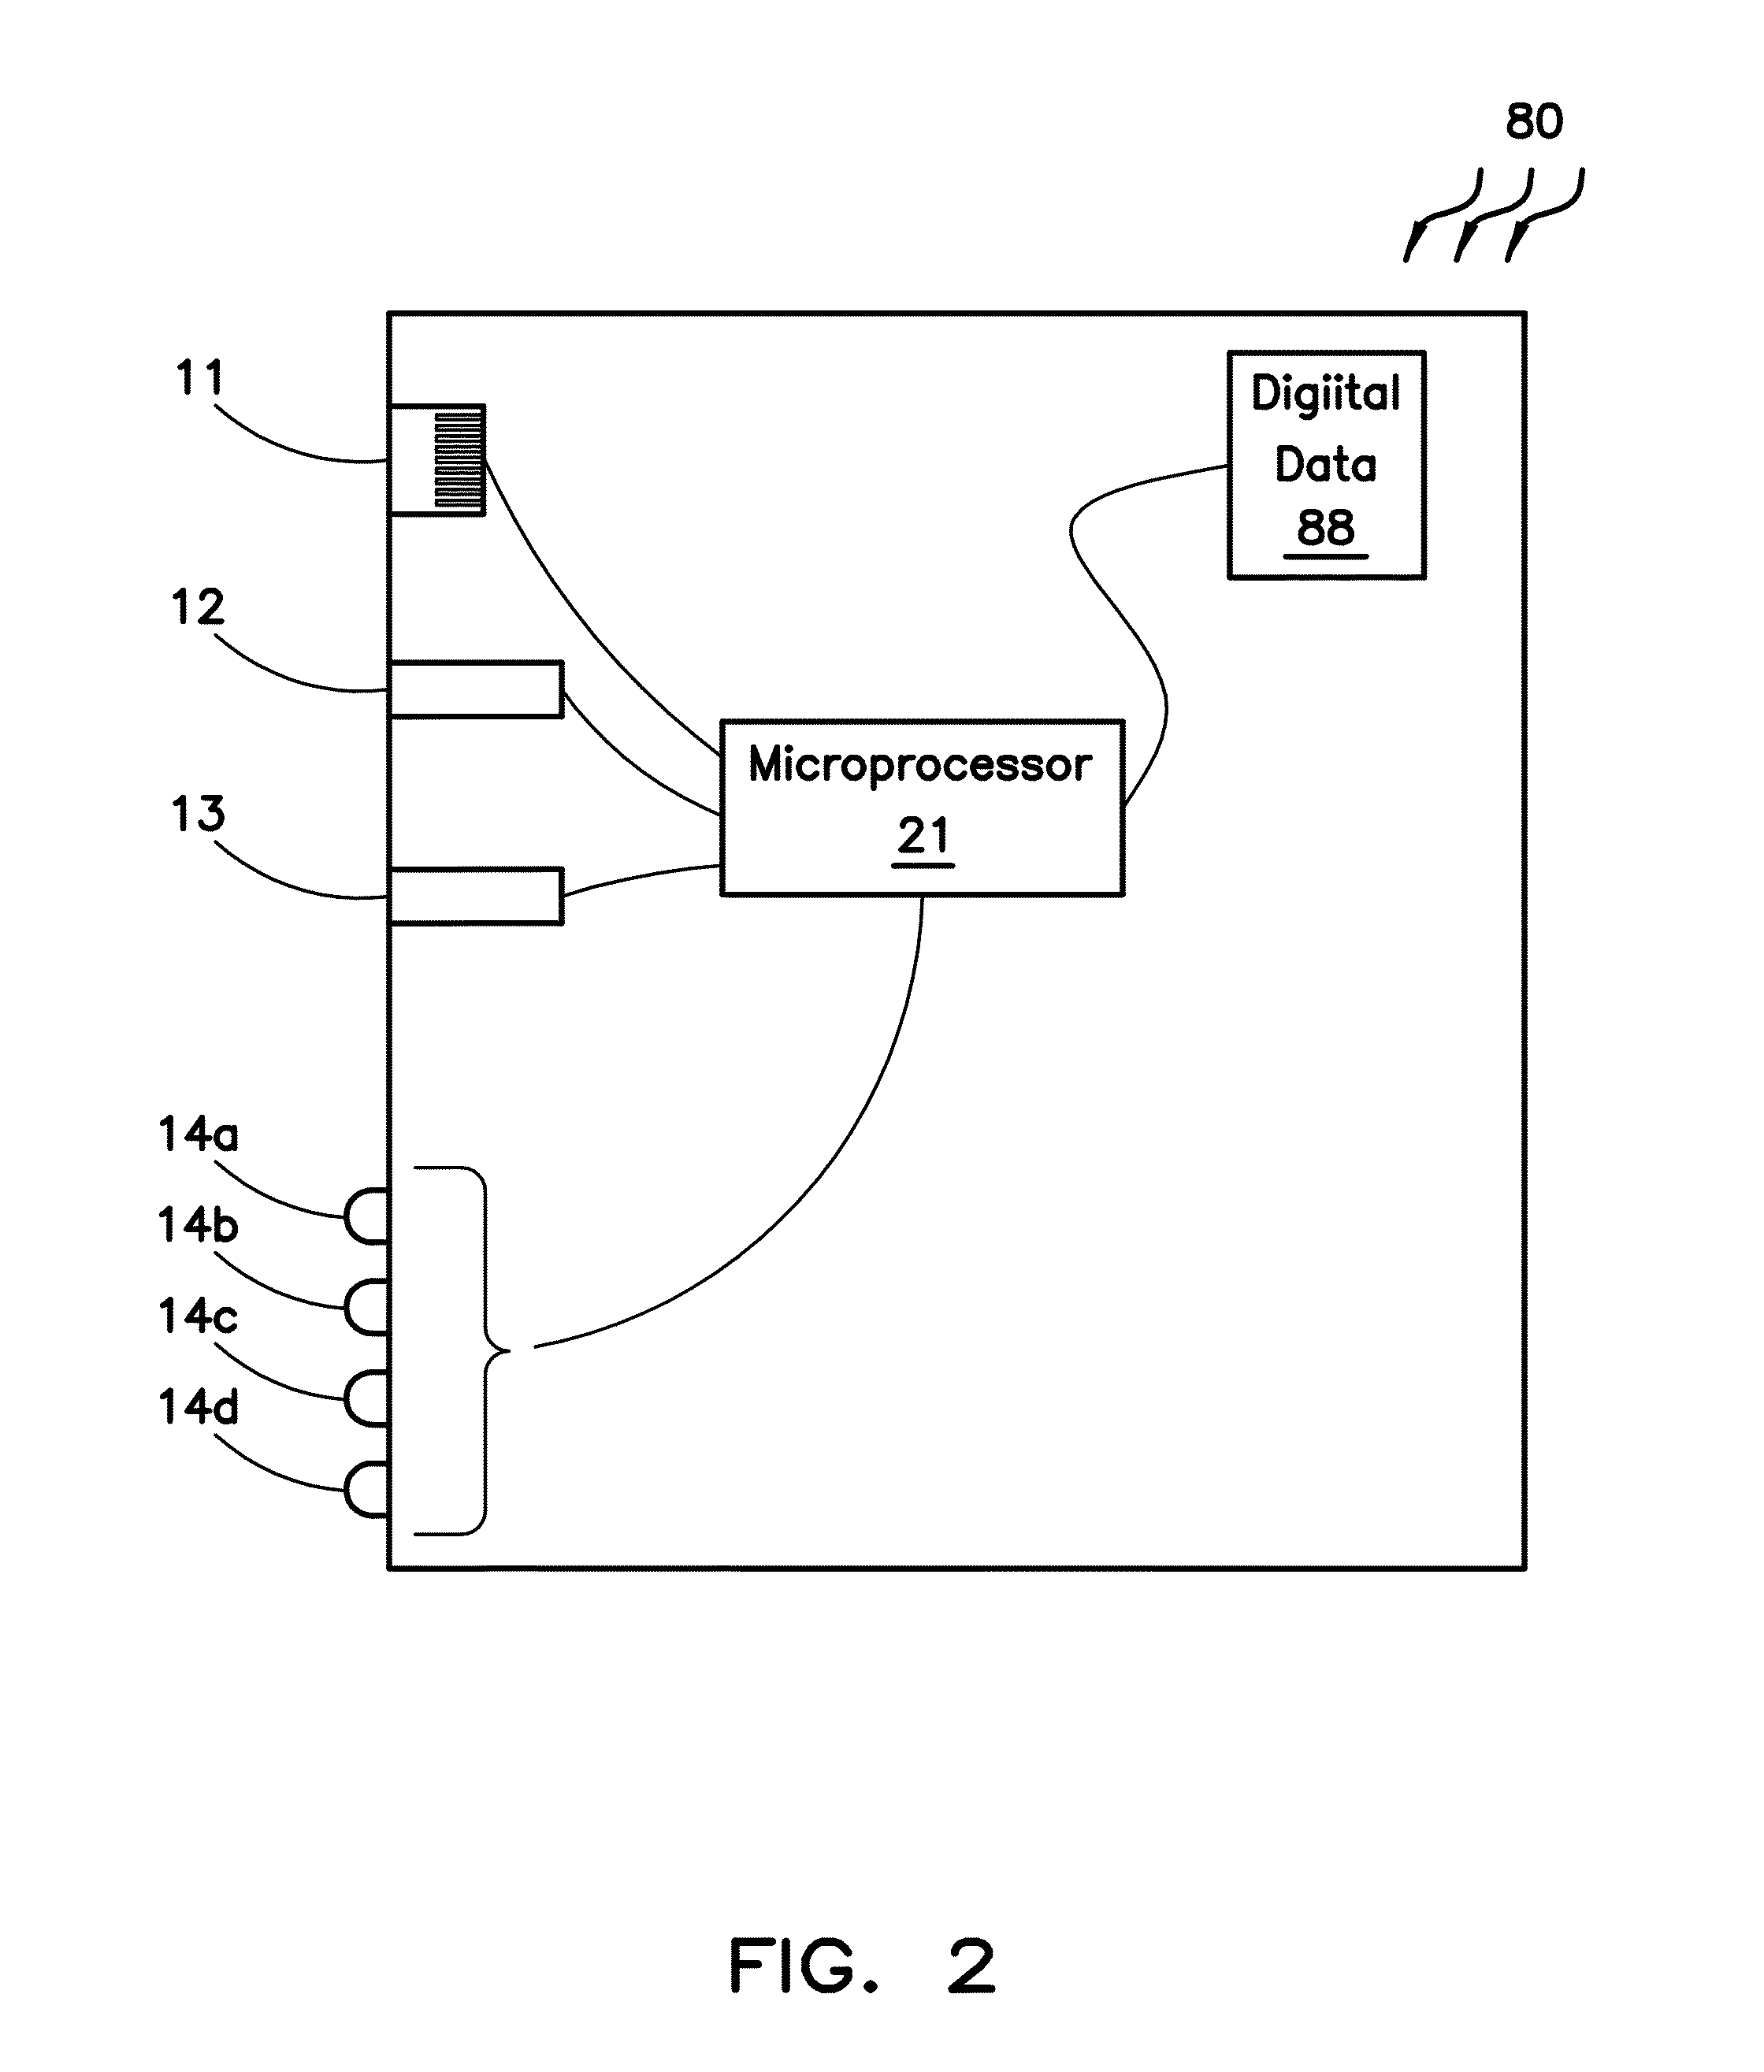 System and Method for Configuring a Traffic Control Sensor System